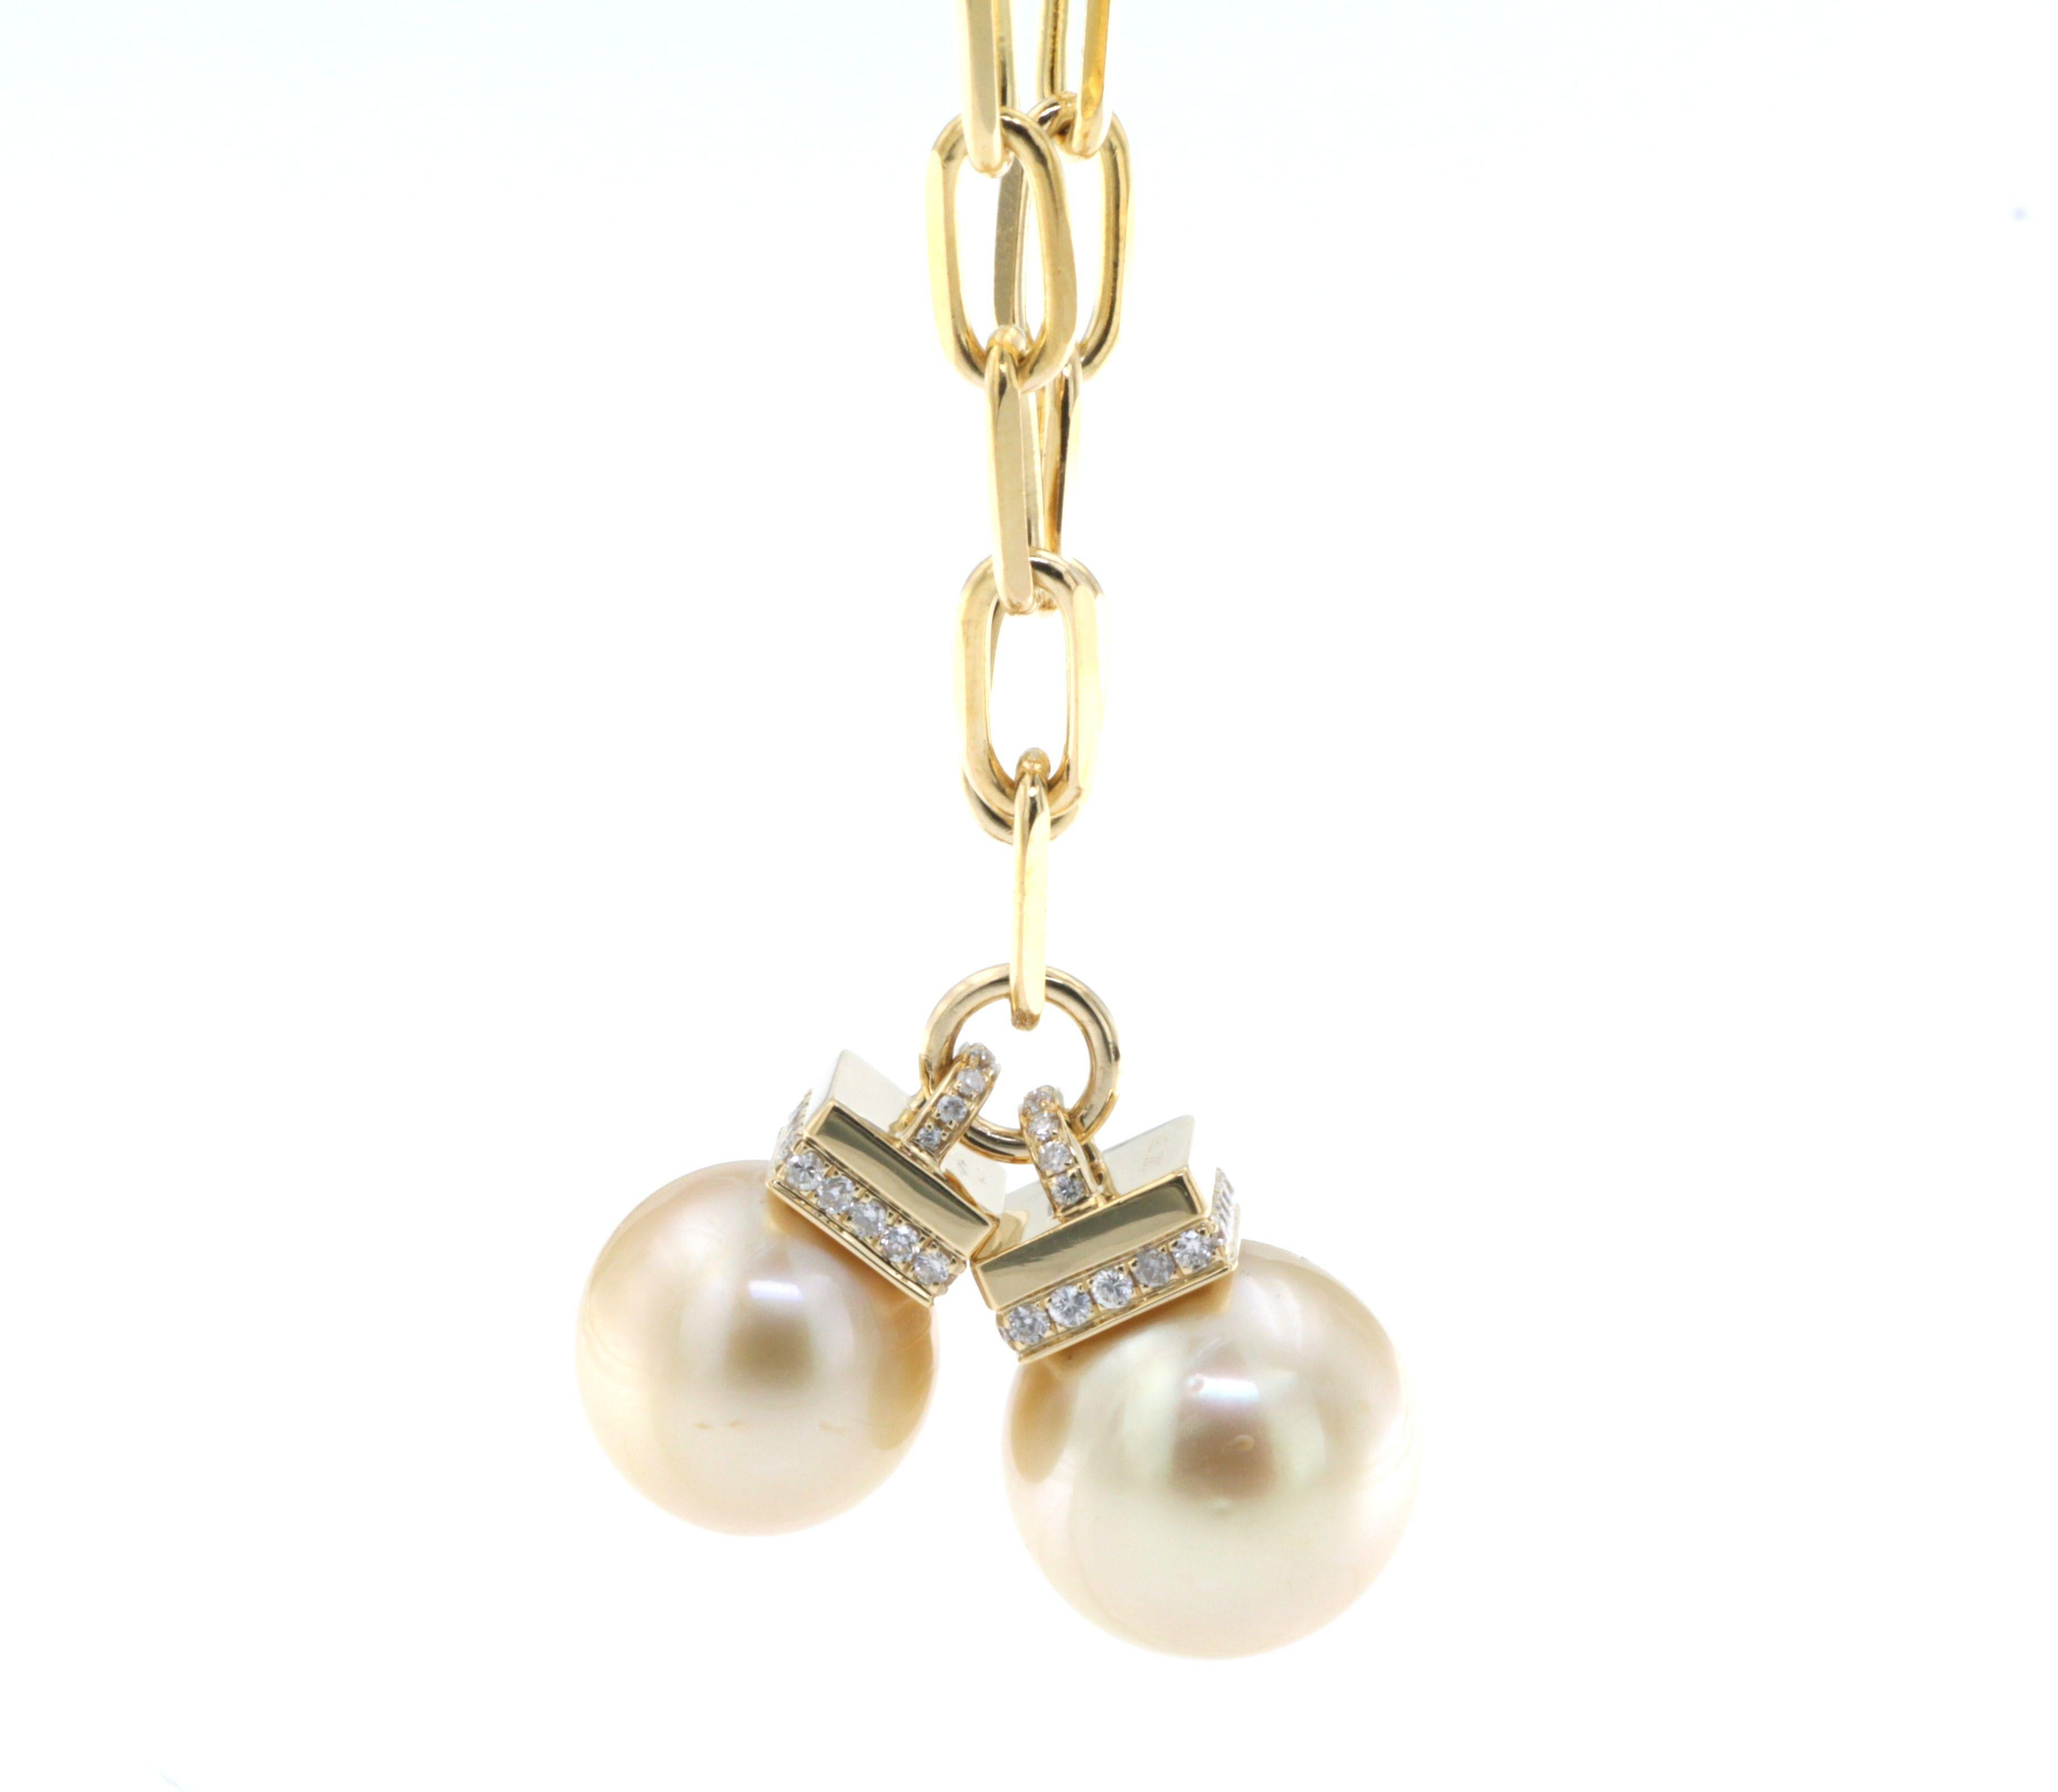 Bead South Sea Pearl and Diamond Bracelet in 18K Yellow Gold